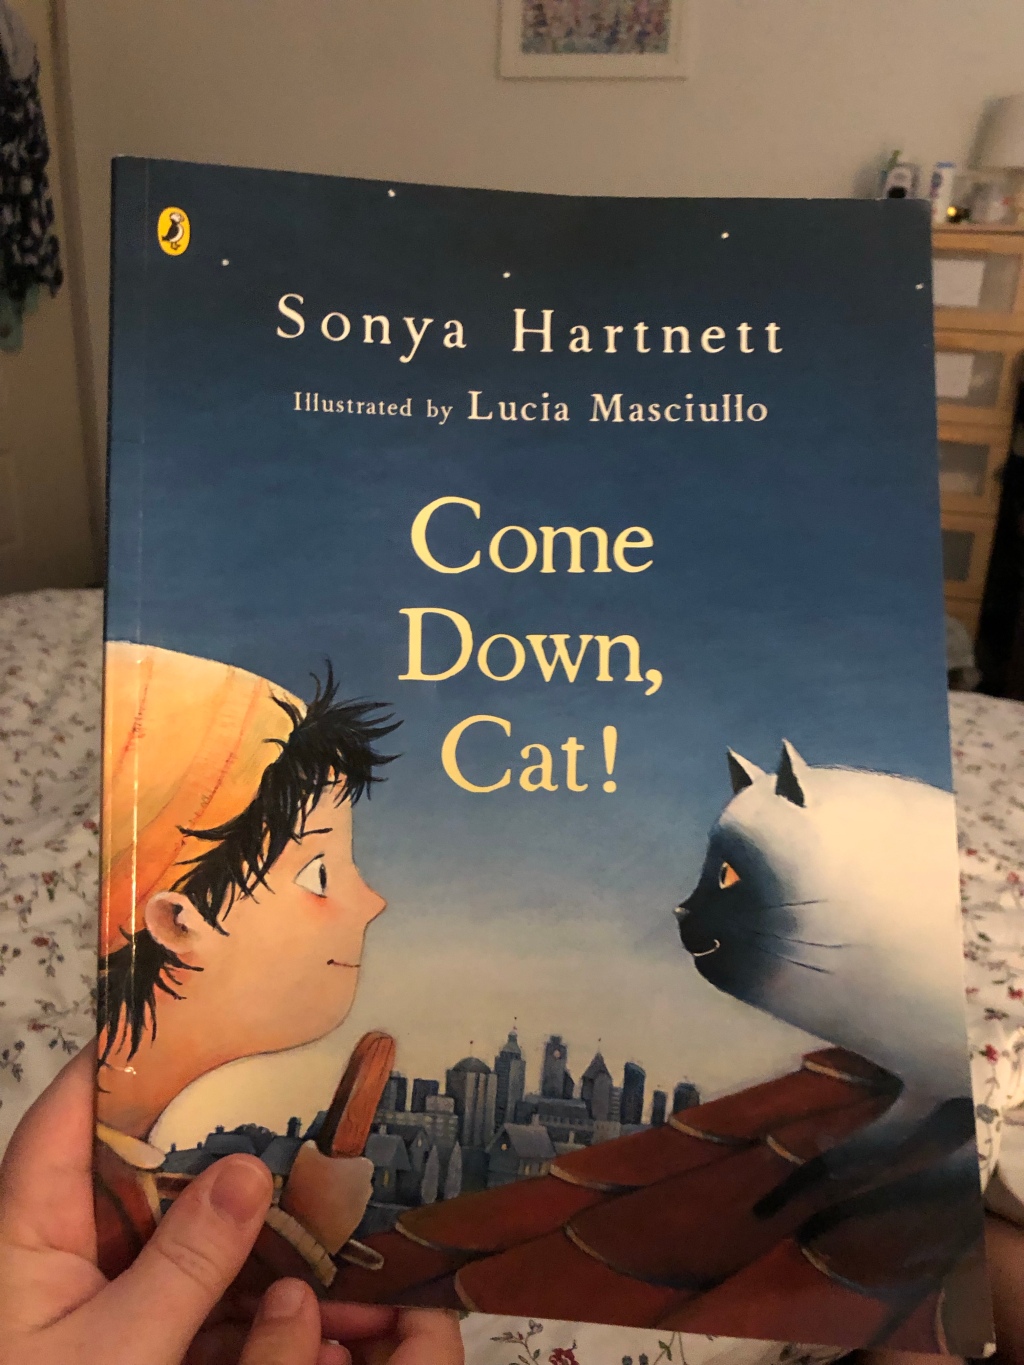 Come Down, Cat! – a book review